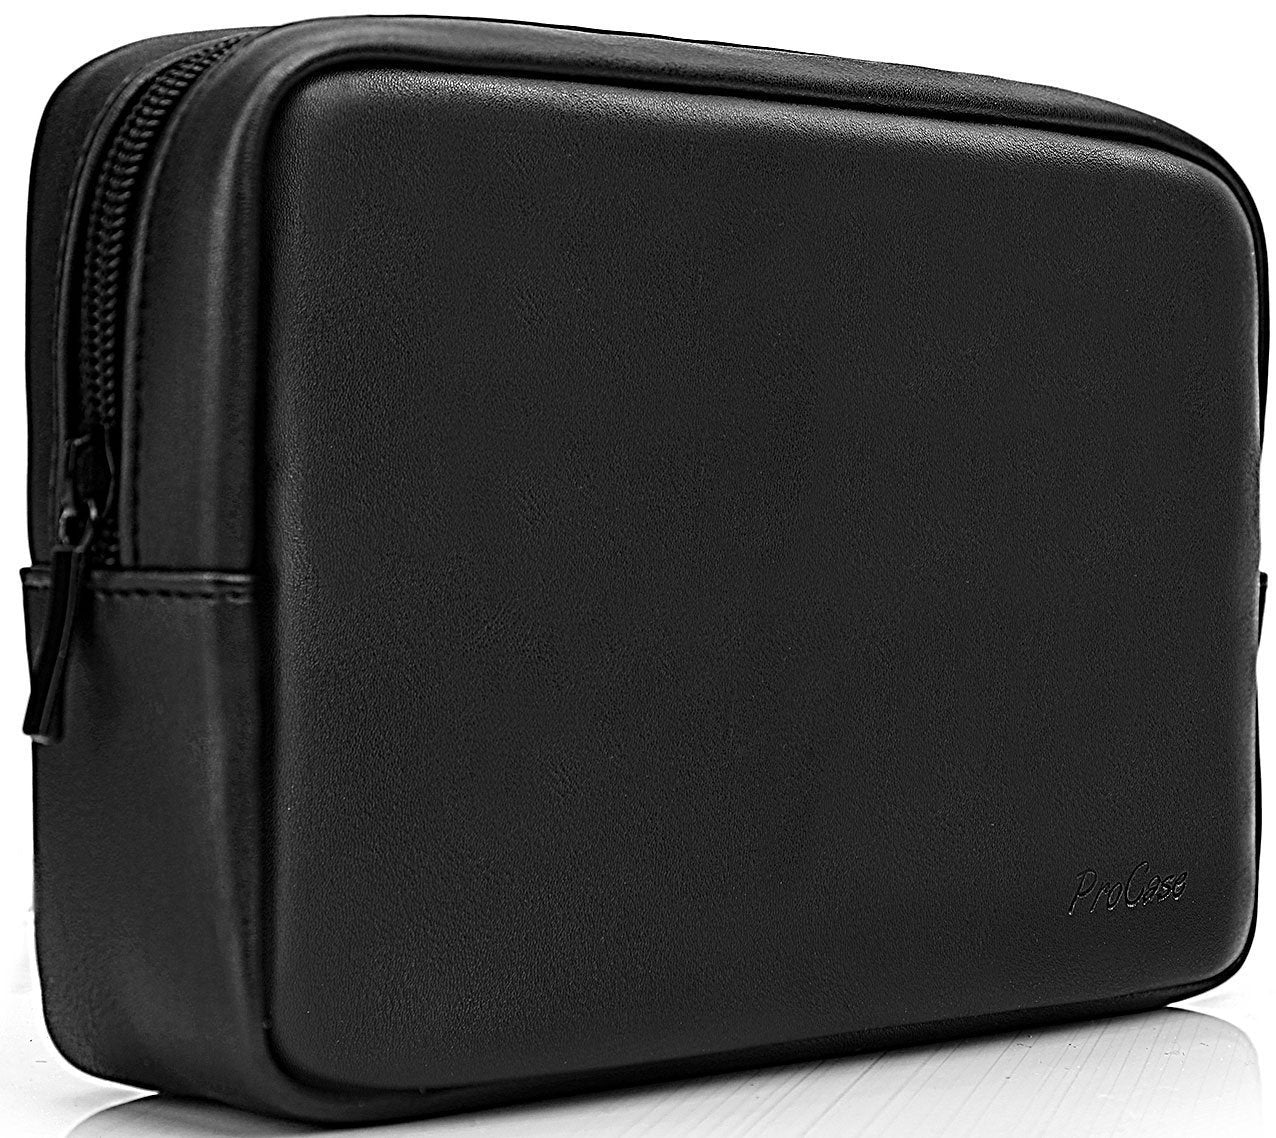  ProCase Hard Travel Electronic Organizer Case for MacBook Power  Adapter Chargers Cables Power Bank Apple Magic Mouse Apple Pencil USB Flash  Disk SD Card Small Portable Accessories Bag -L, Black 